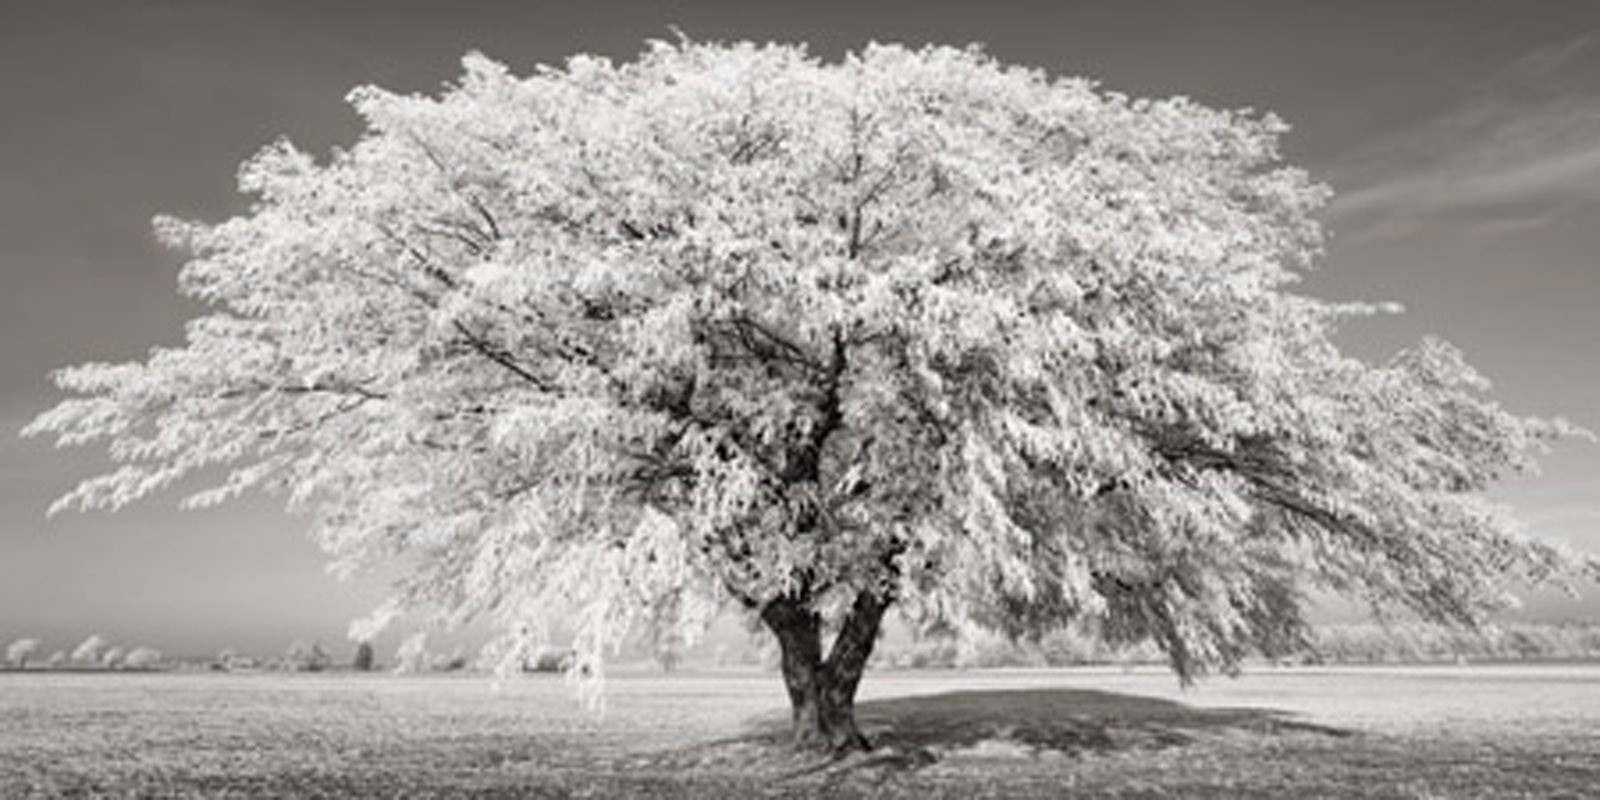 Frank Krahmer - Lime tree with frost, Bavaria, Germany